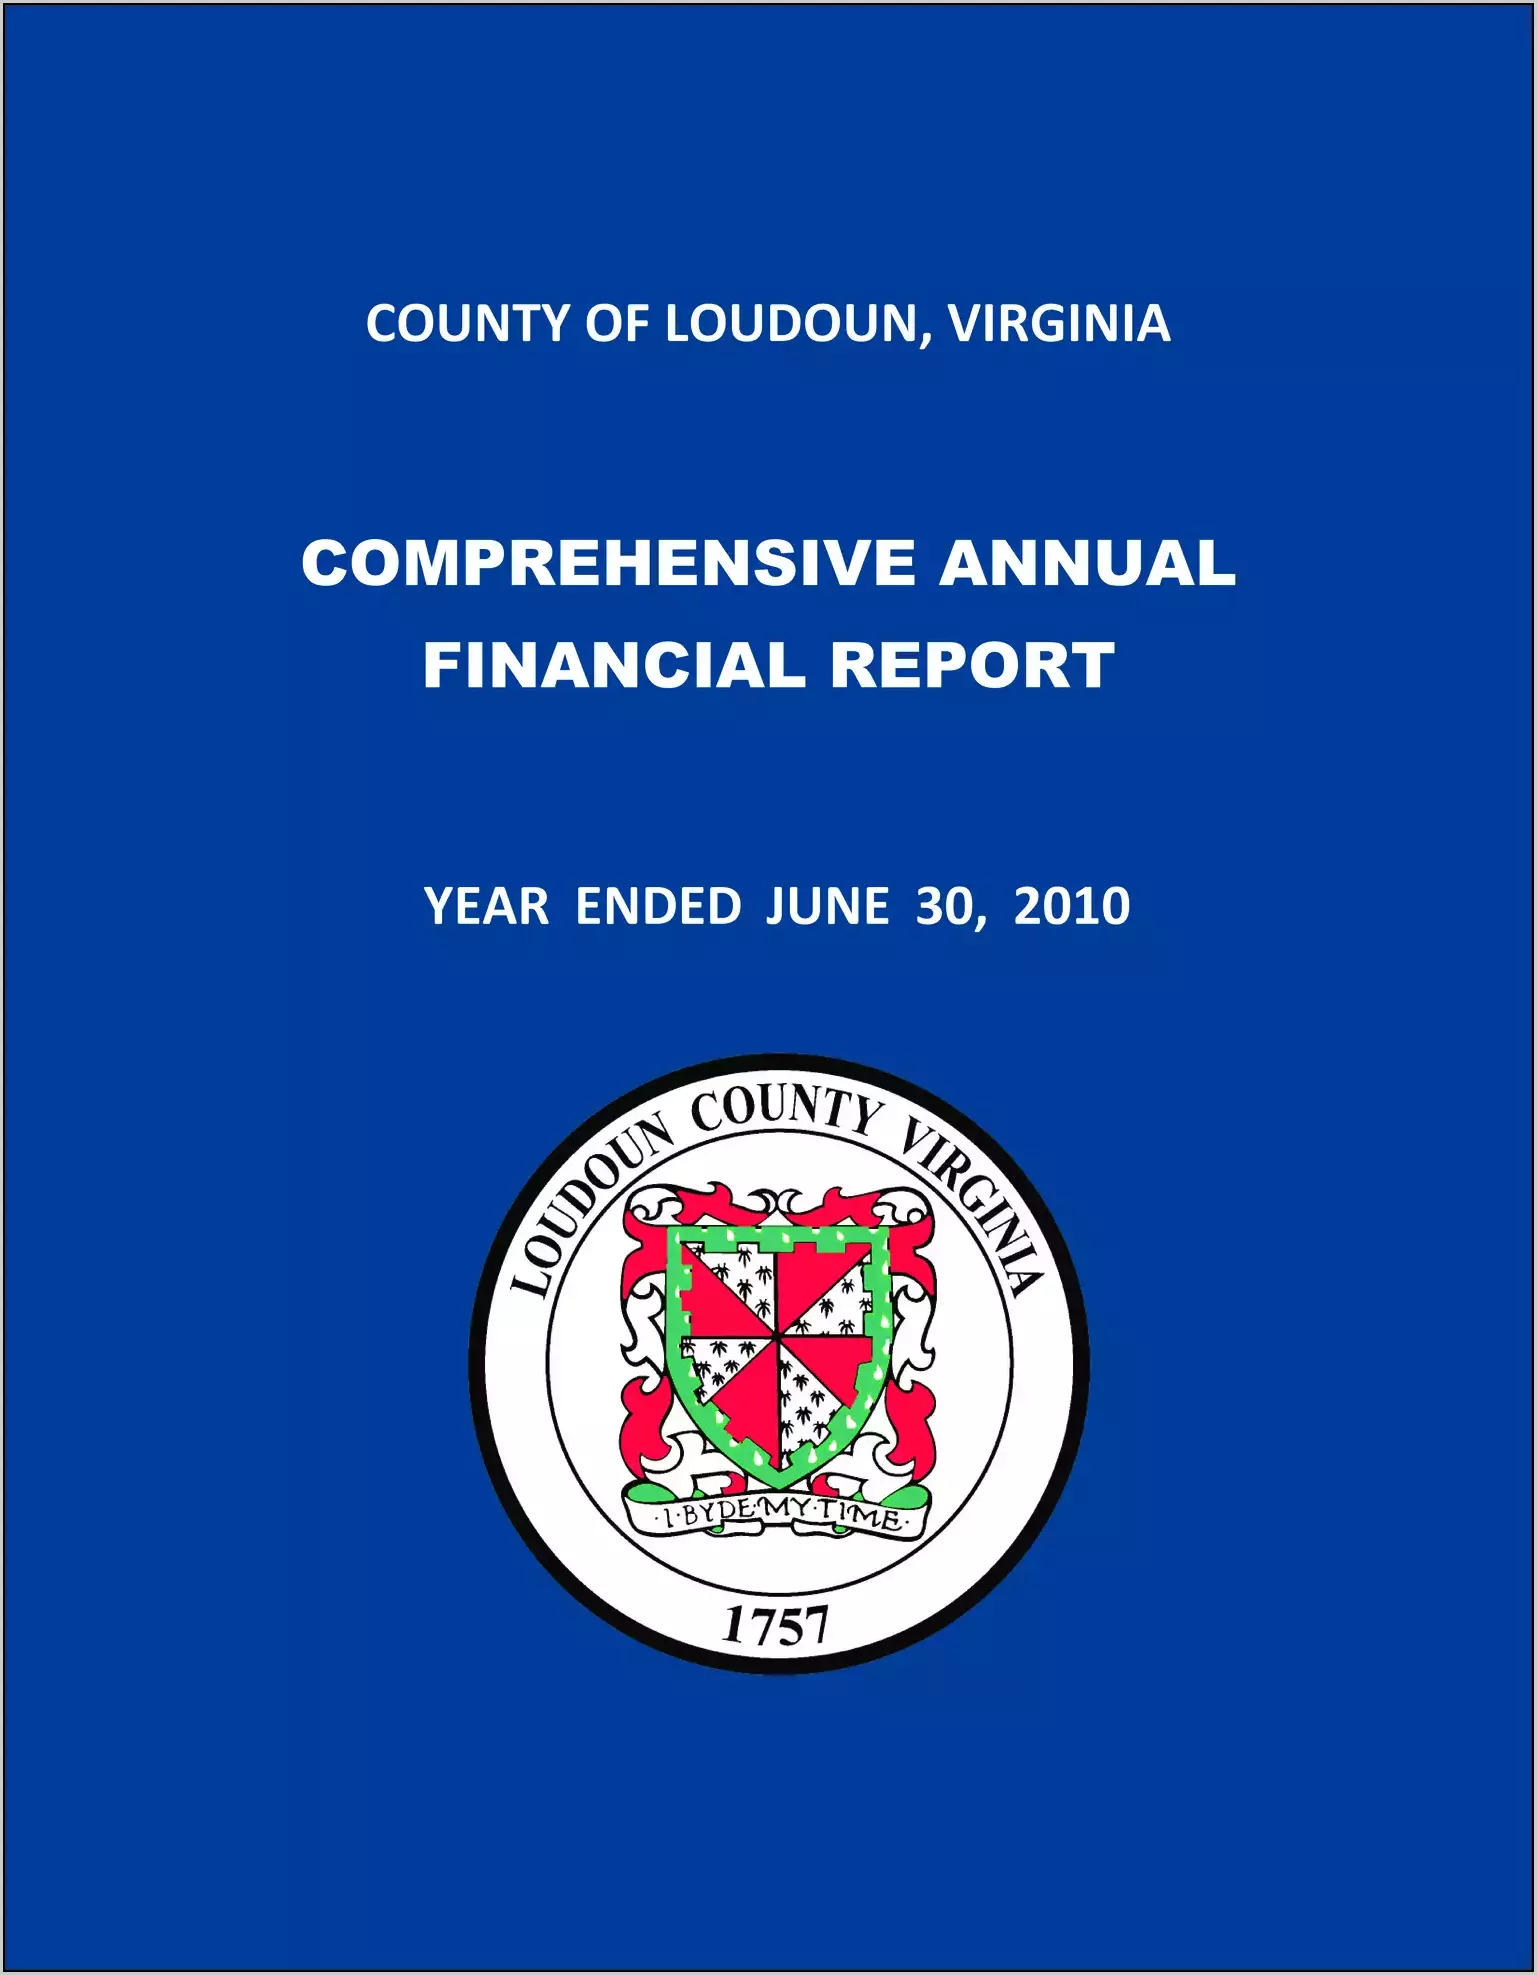 2010 Annual Financial Report for County of Loudoun